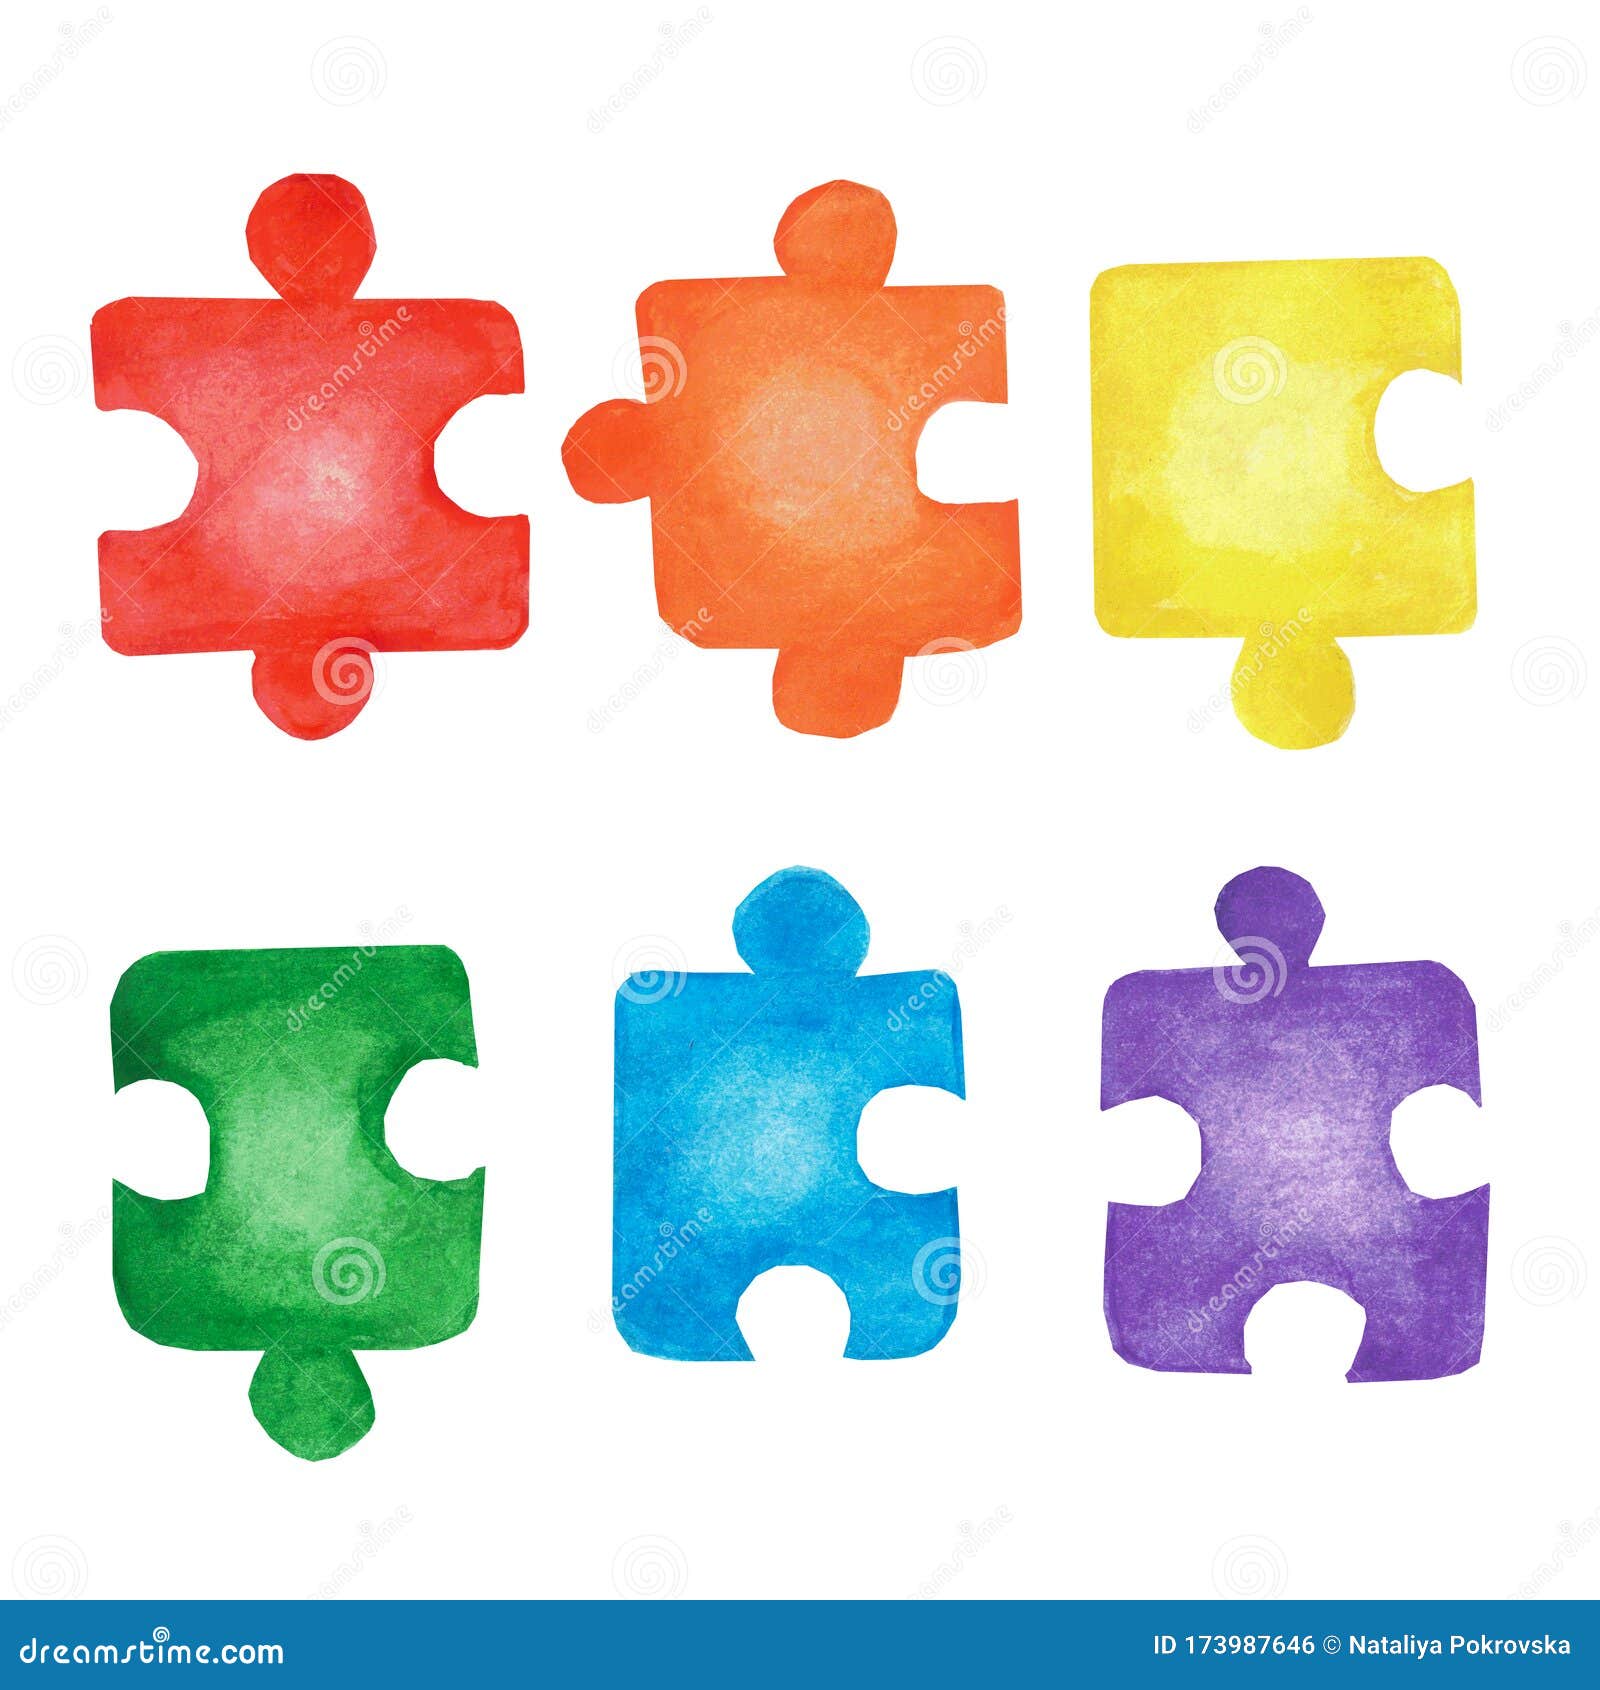 Set of Colorful Jigsaw Puzzles Isolated on White Background in Cartoon  Style. Watercolor Hand Drawn Illustrations Stock Illustration -  Illustration of disabilities, children: 173987646